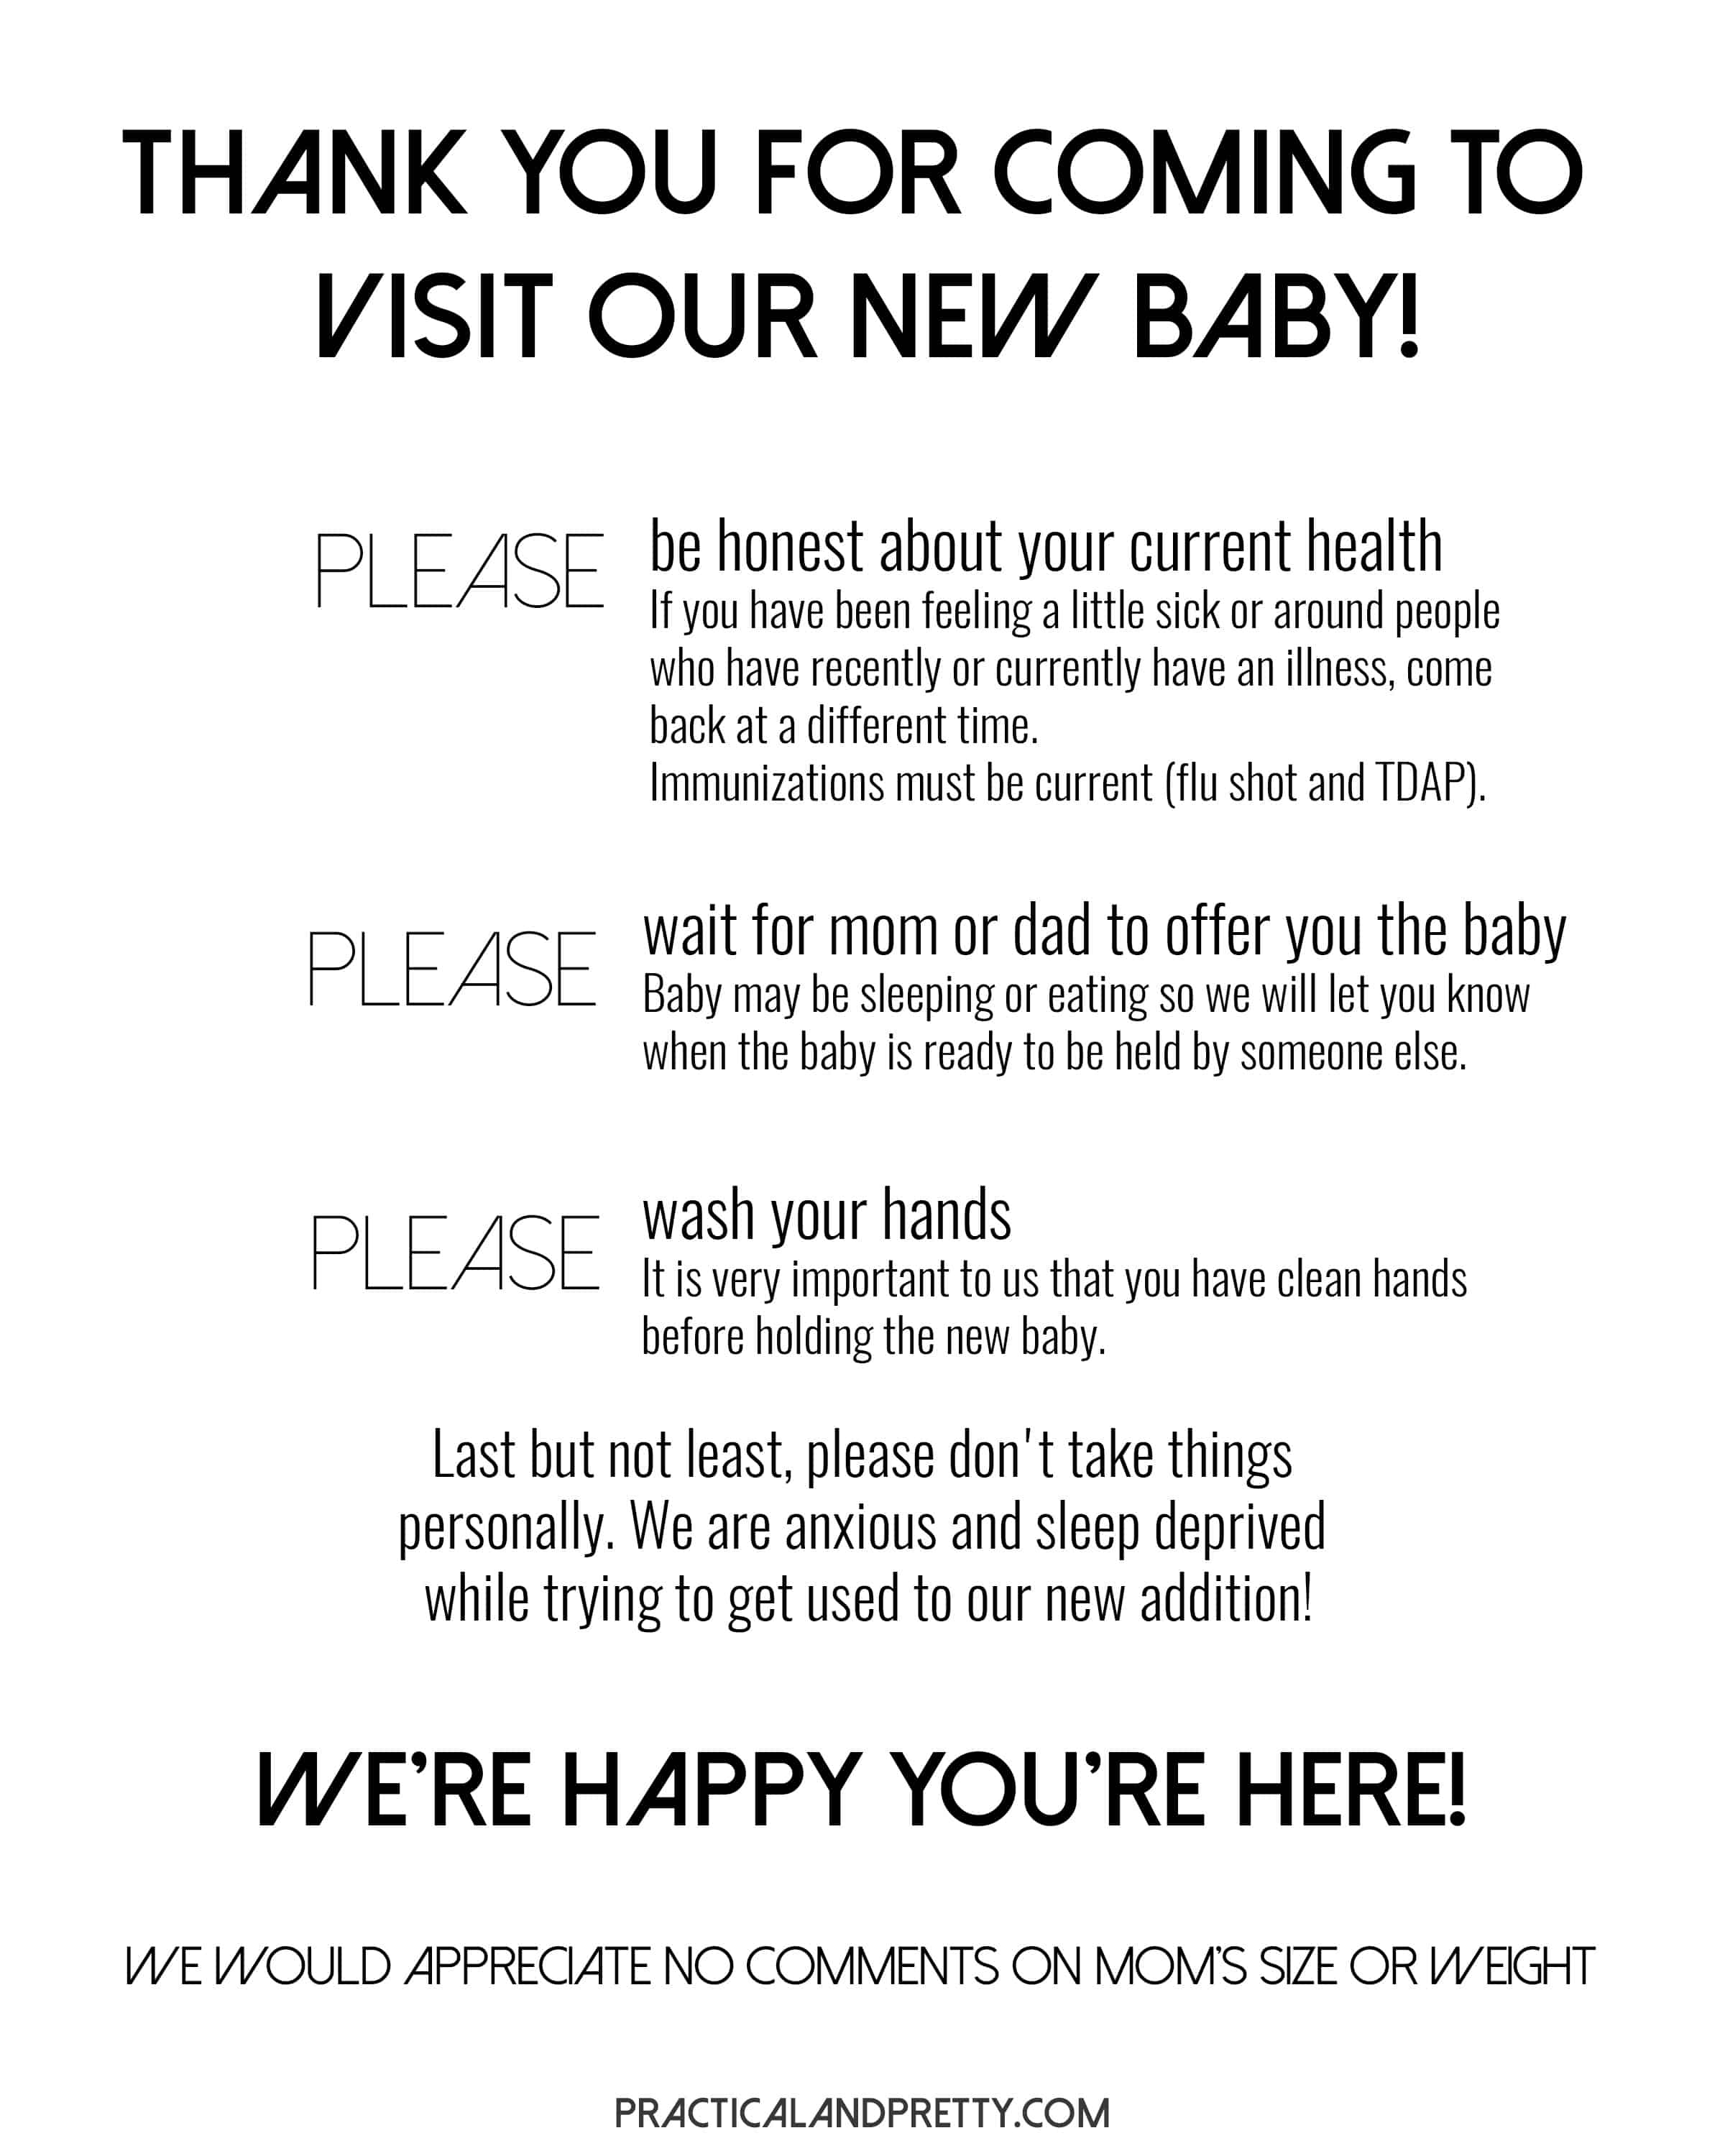 Make sure your visitors coming to see your newborn know your needs. It is so important for the parents to feel like they have thier needs and wishes known. 